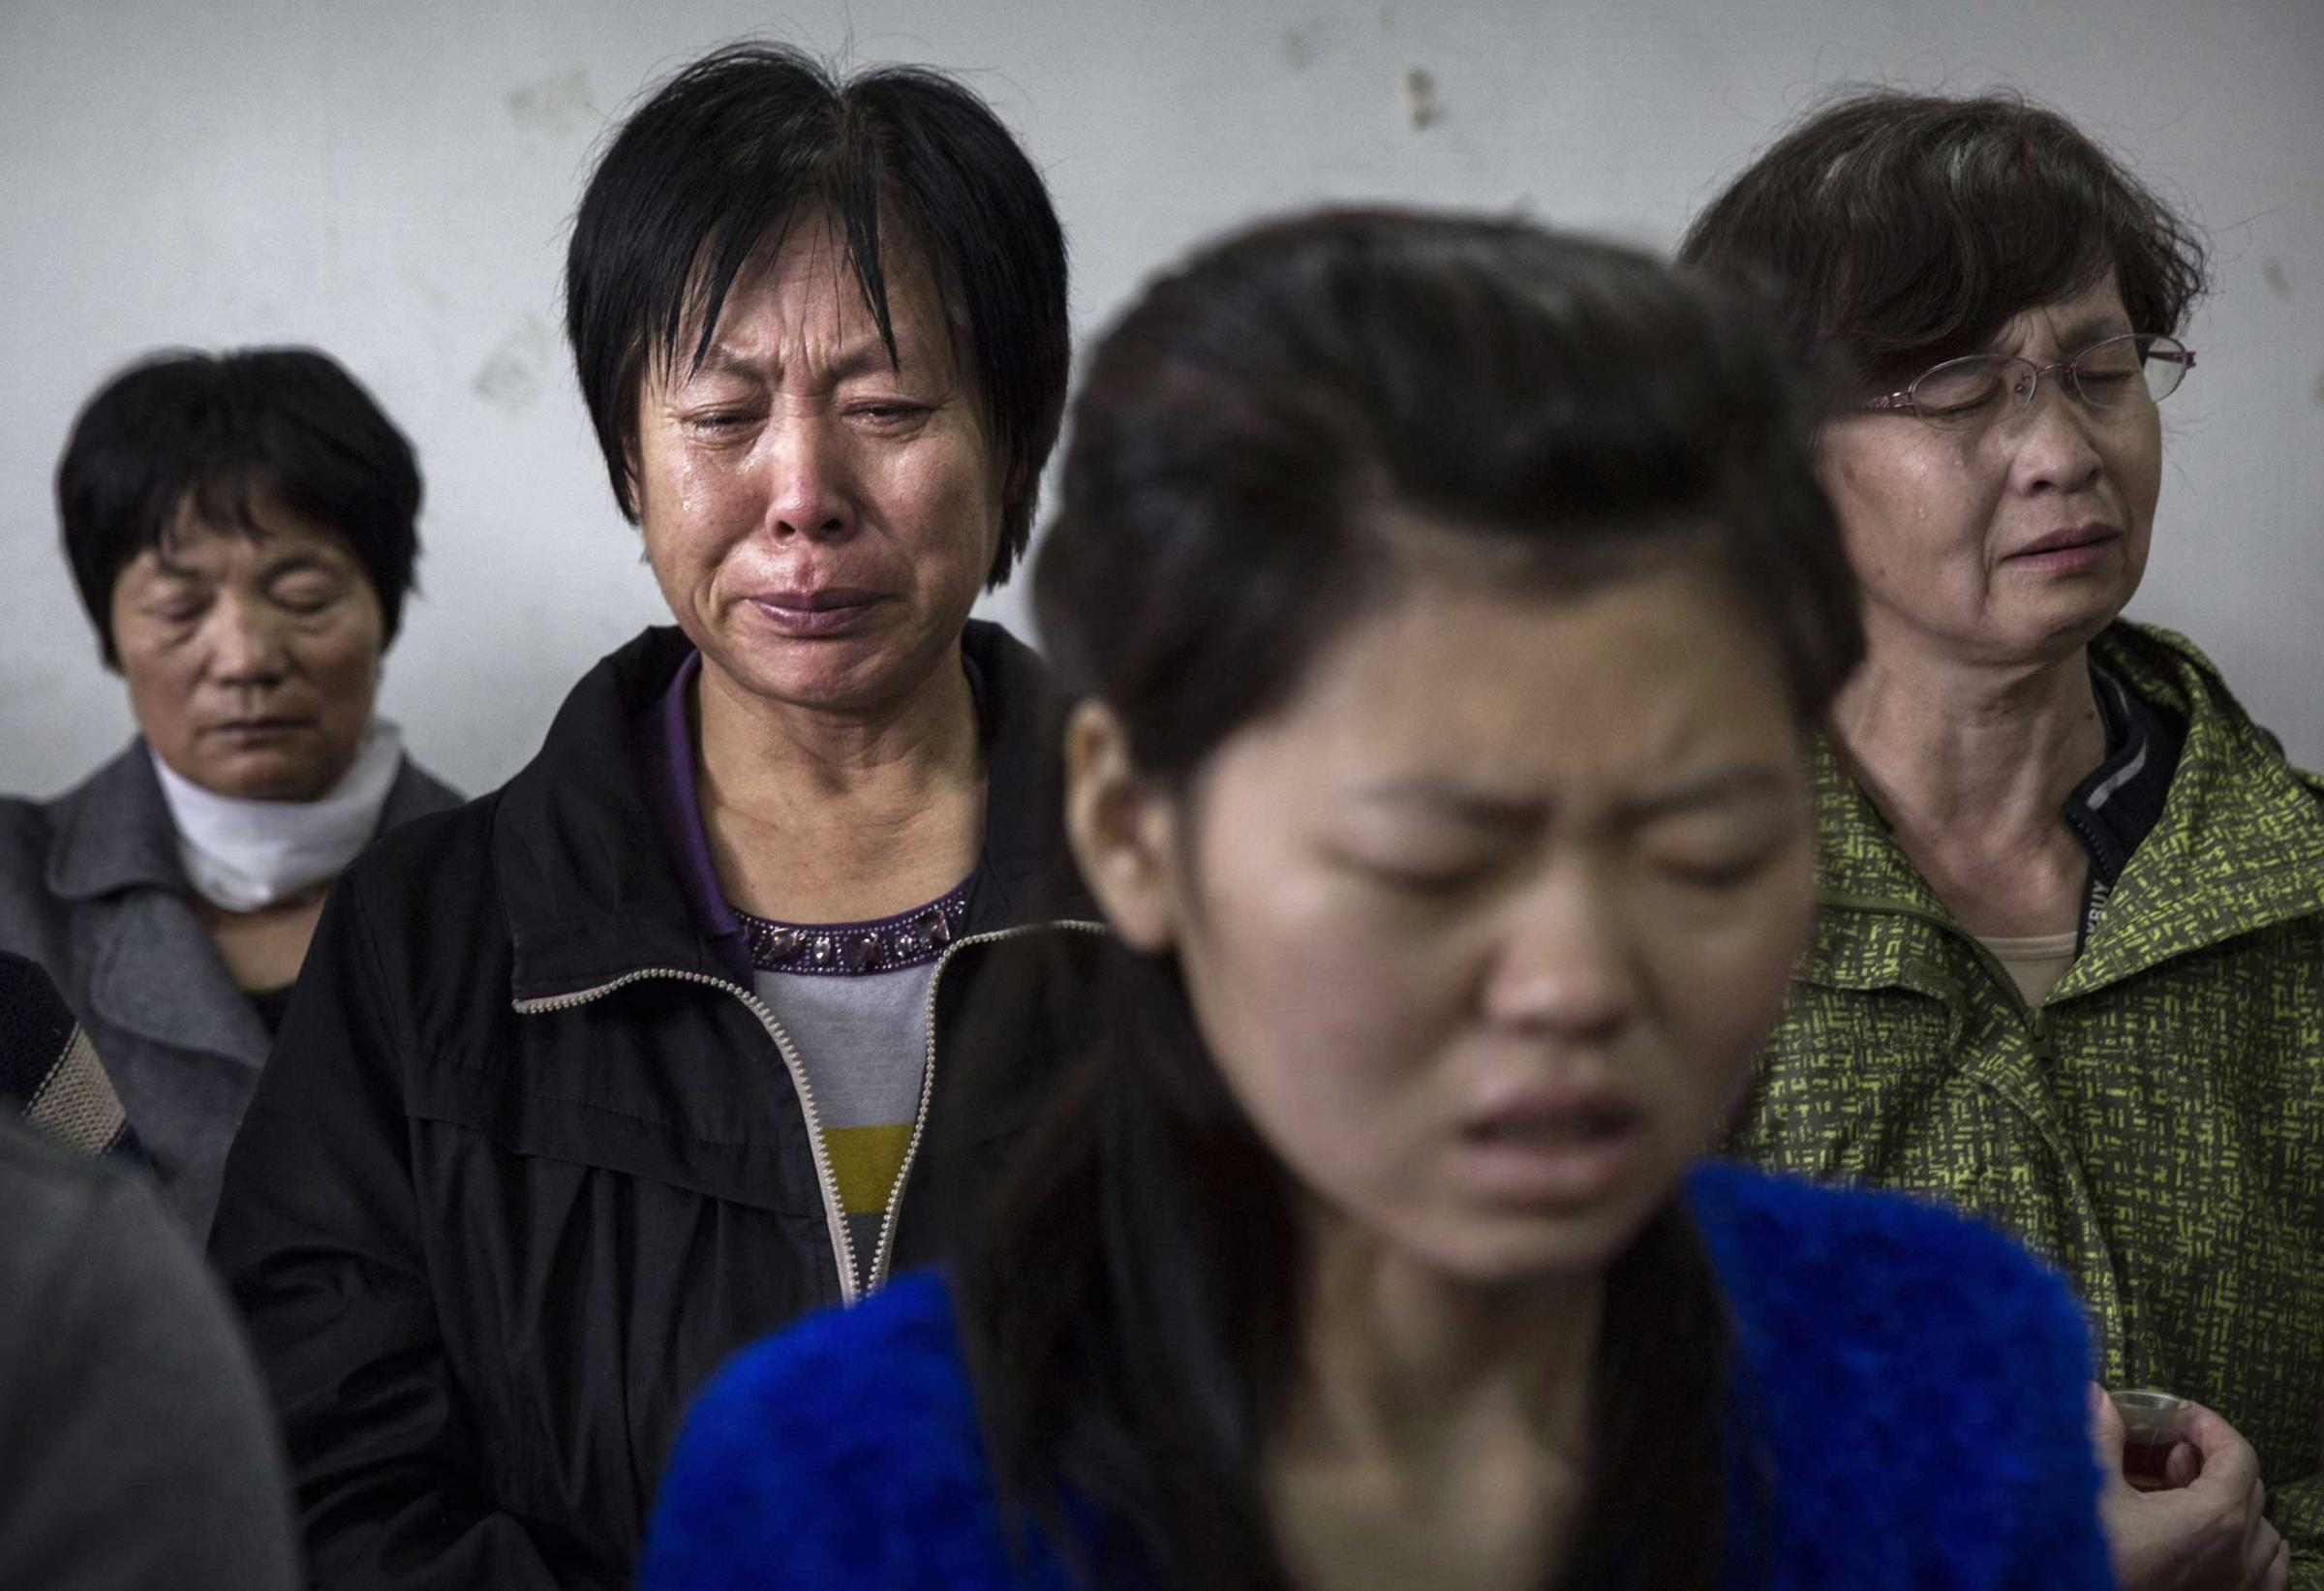 A woman weeps as she and others pray during a service.